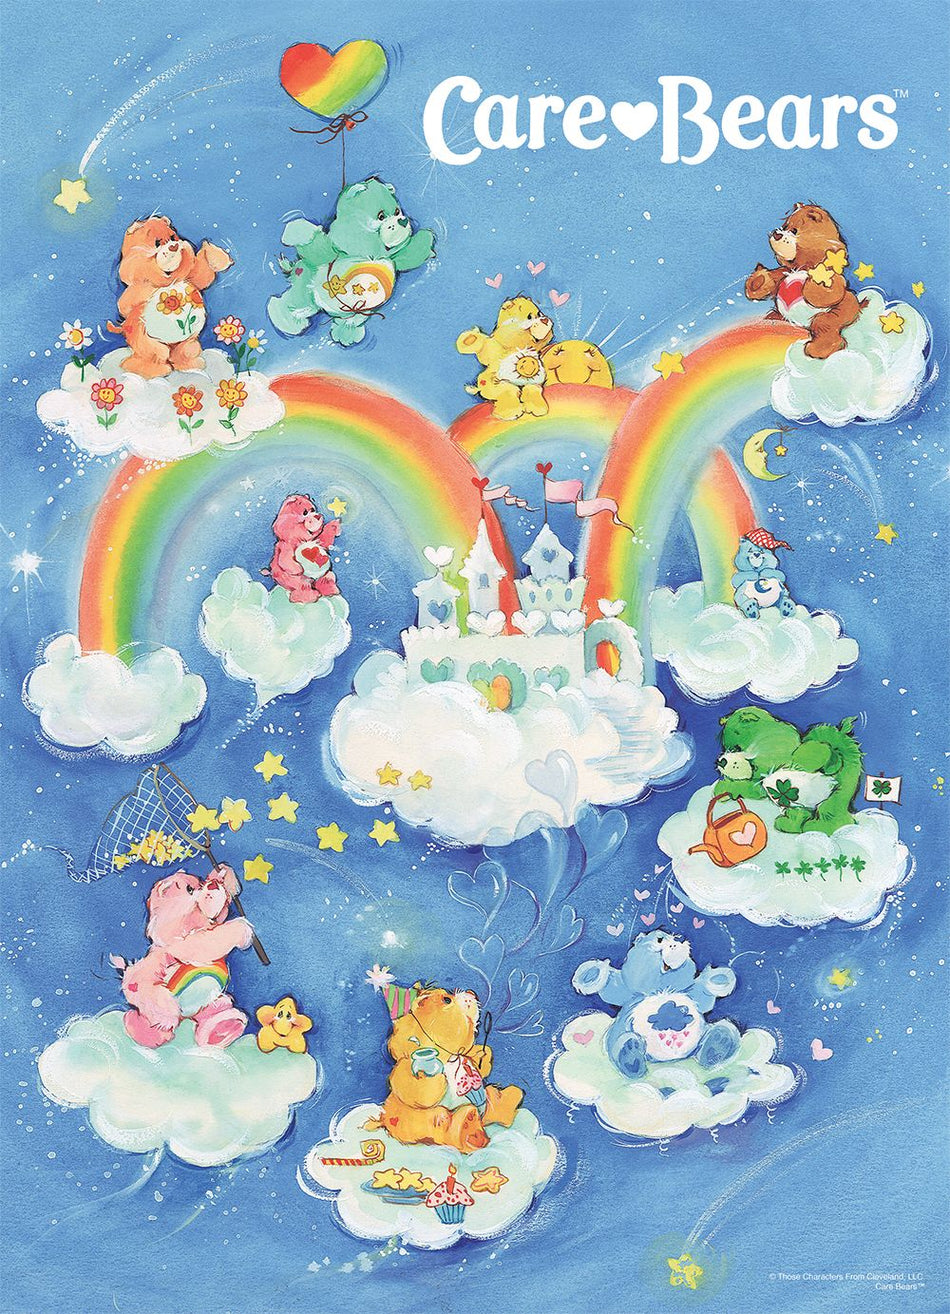 USAOPOLY: Care Bears “Care-A-Lot”: 1000 Piece Puzzle